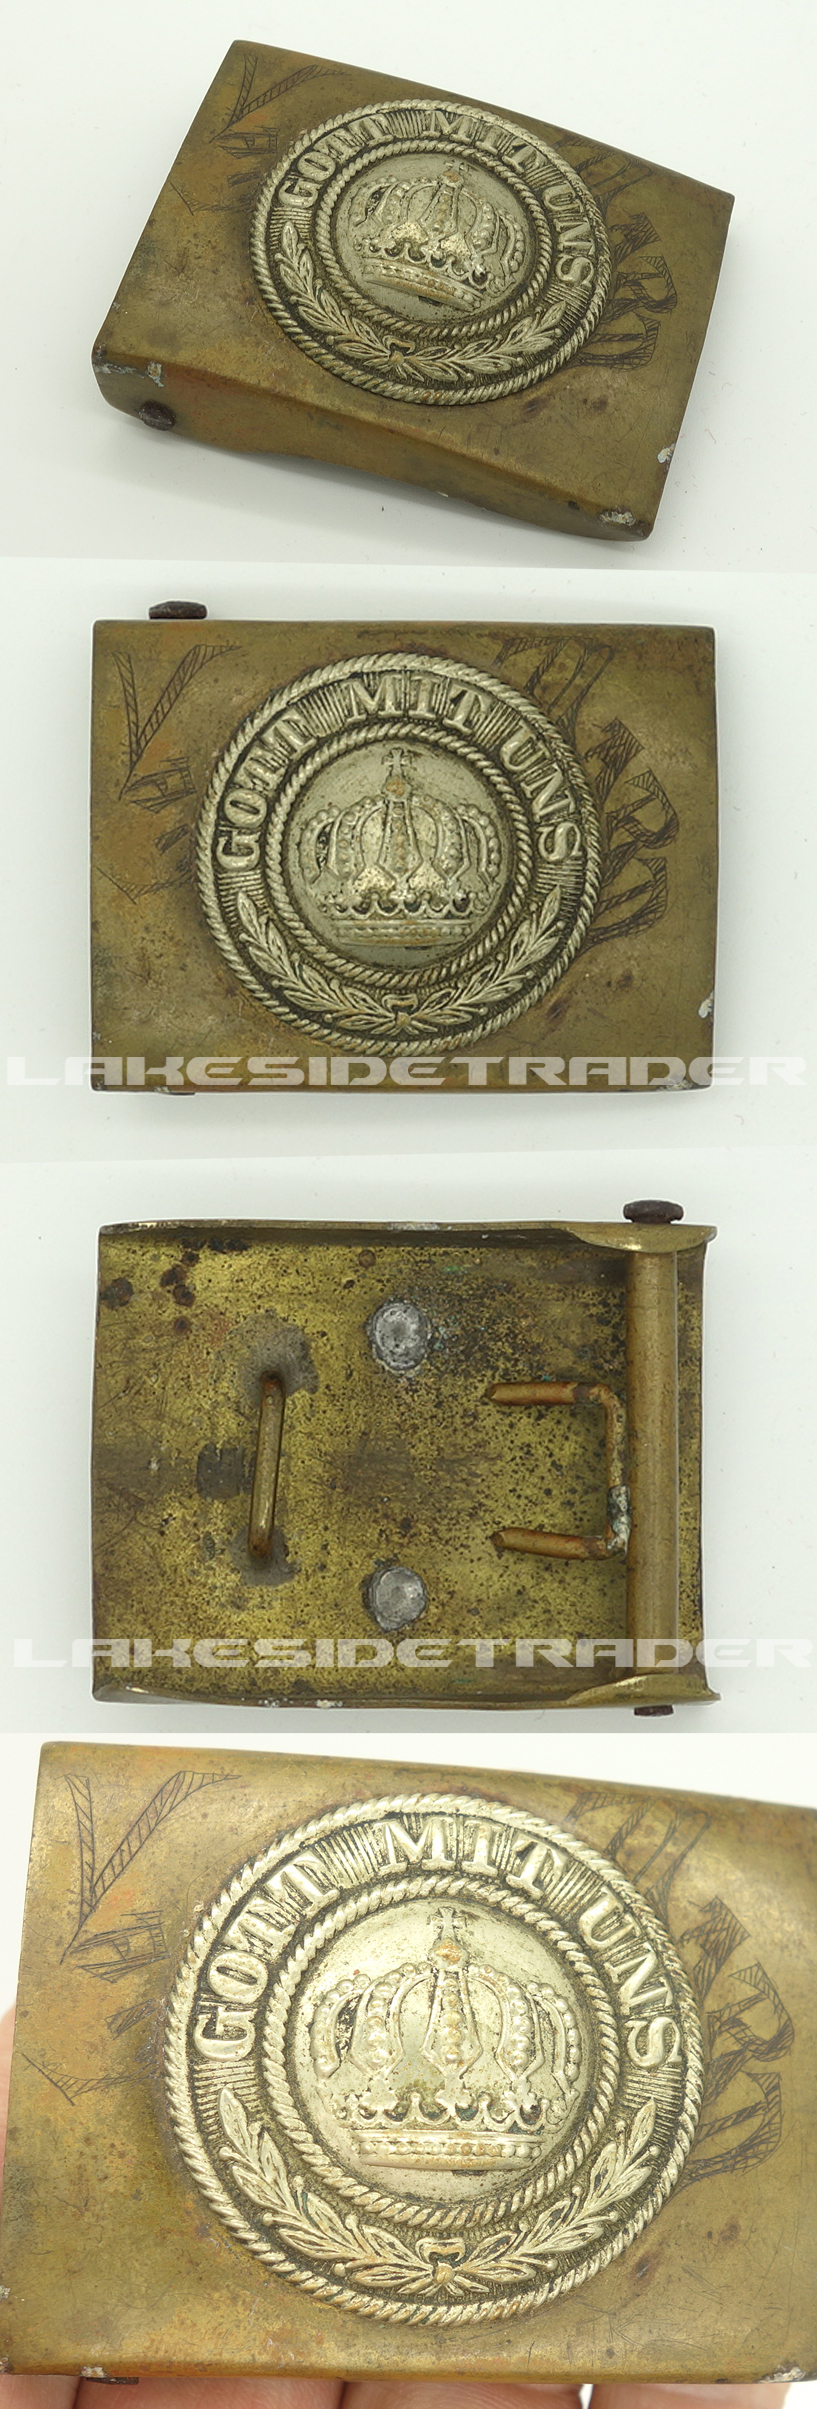 Personalized Imperial Prussian Army Belt Buckle